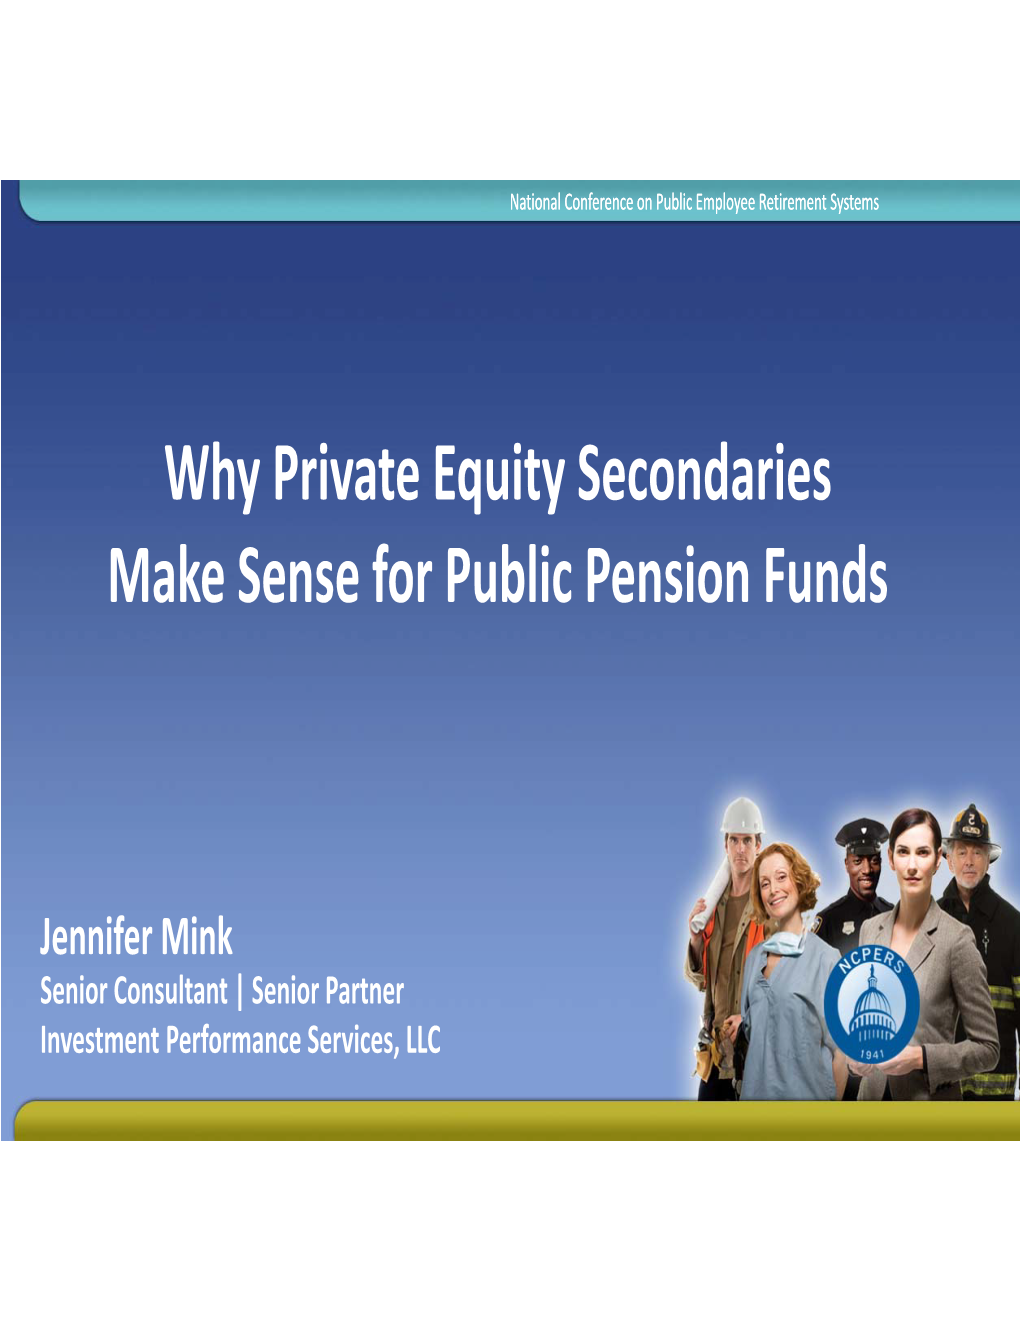 Why Private Equity Secondaries Make Sense for Public Pension Funds